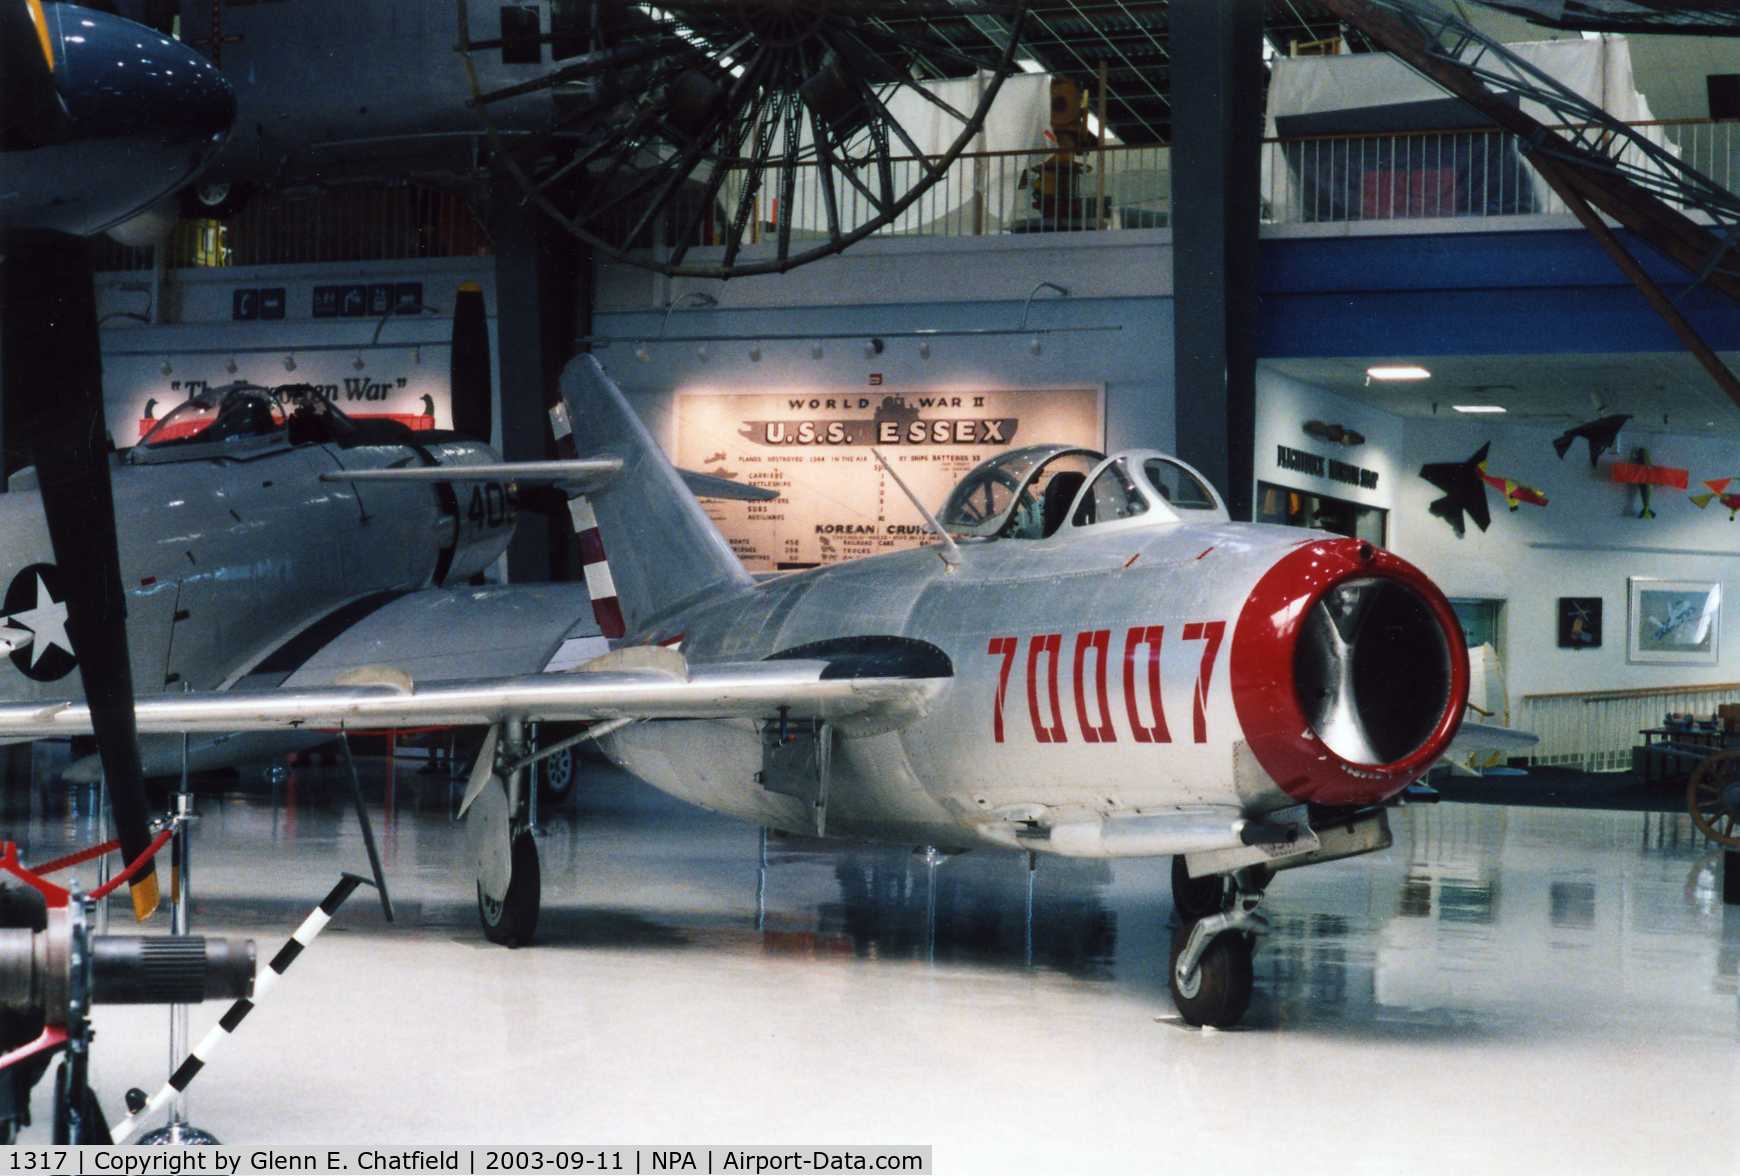 1317, Mikoyan-Gurevich MiG-15bis C/N Not found 1317, MiG-15 at the National Museum of Naval Aviation